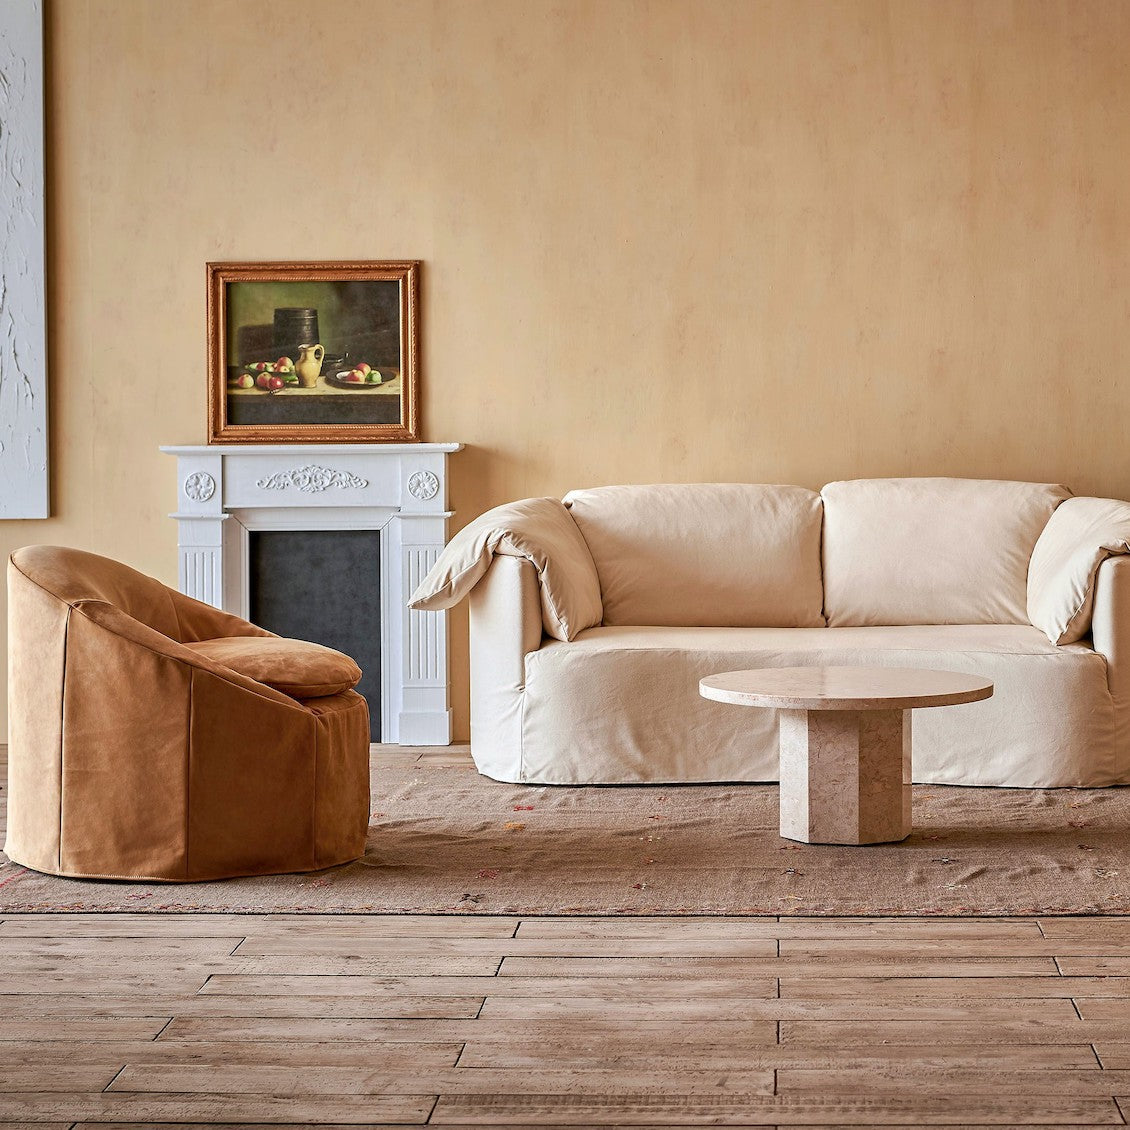 Loula Sofa in Beach Walk, a warm, creamy beige Cotton Canvas, placed in a room alongside the Ozzi Chair in Mojave Glow, a tan Meridian Leather